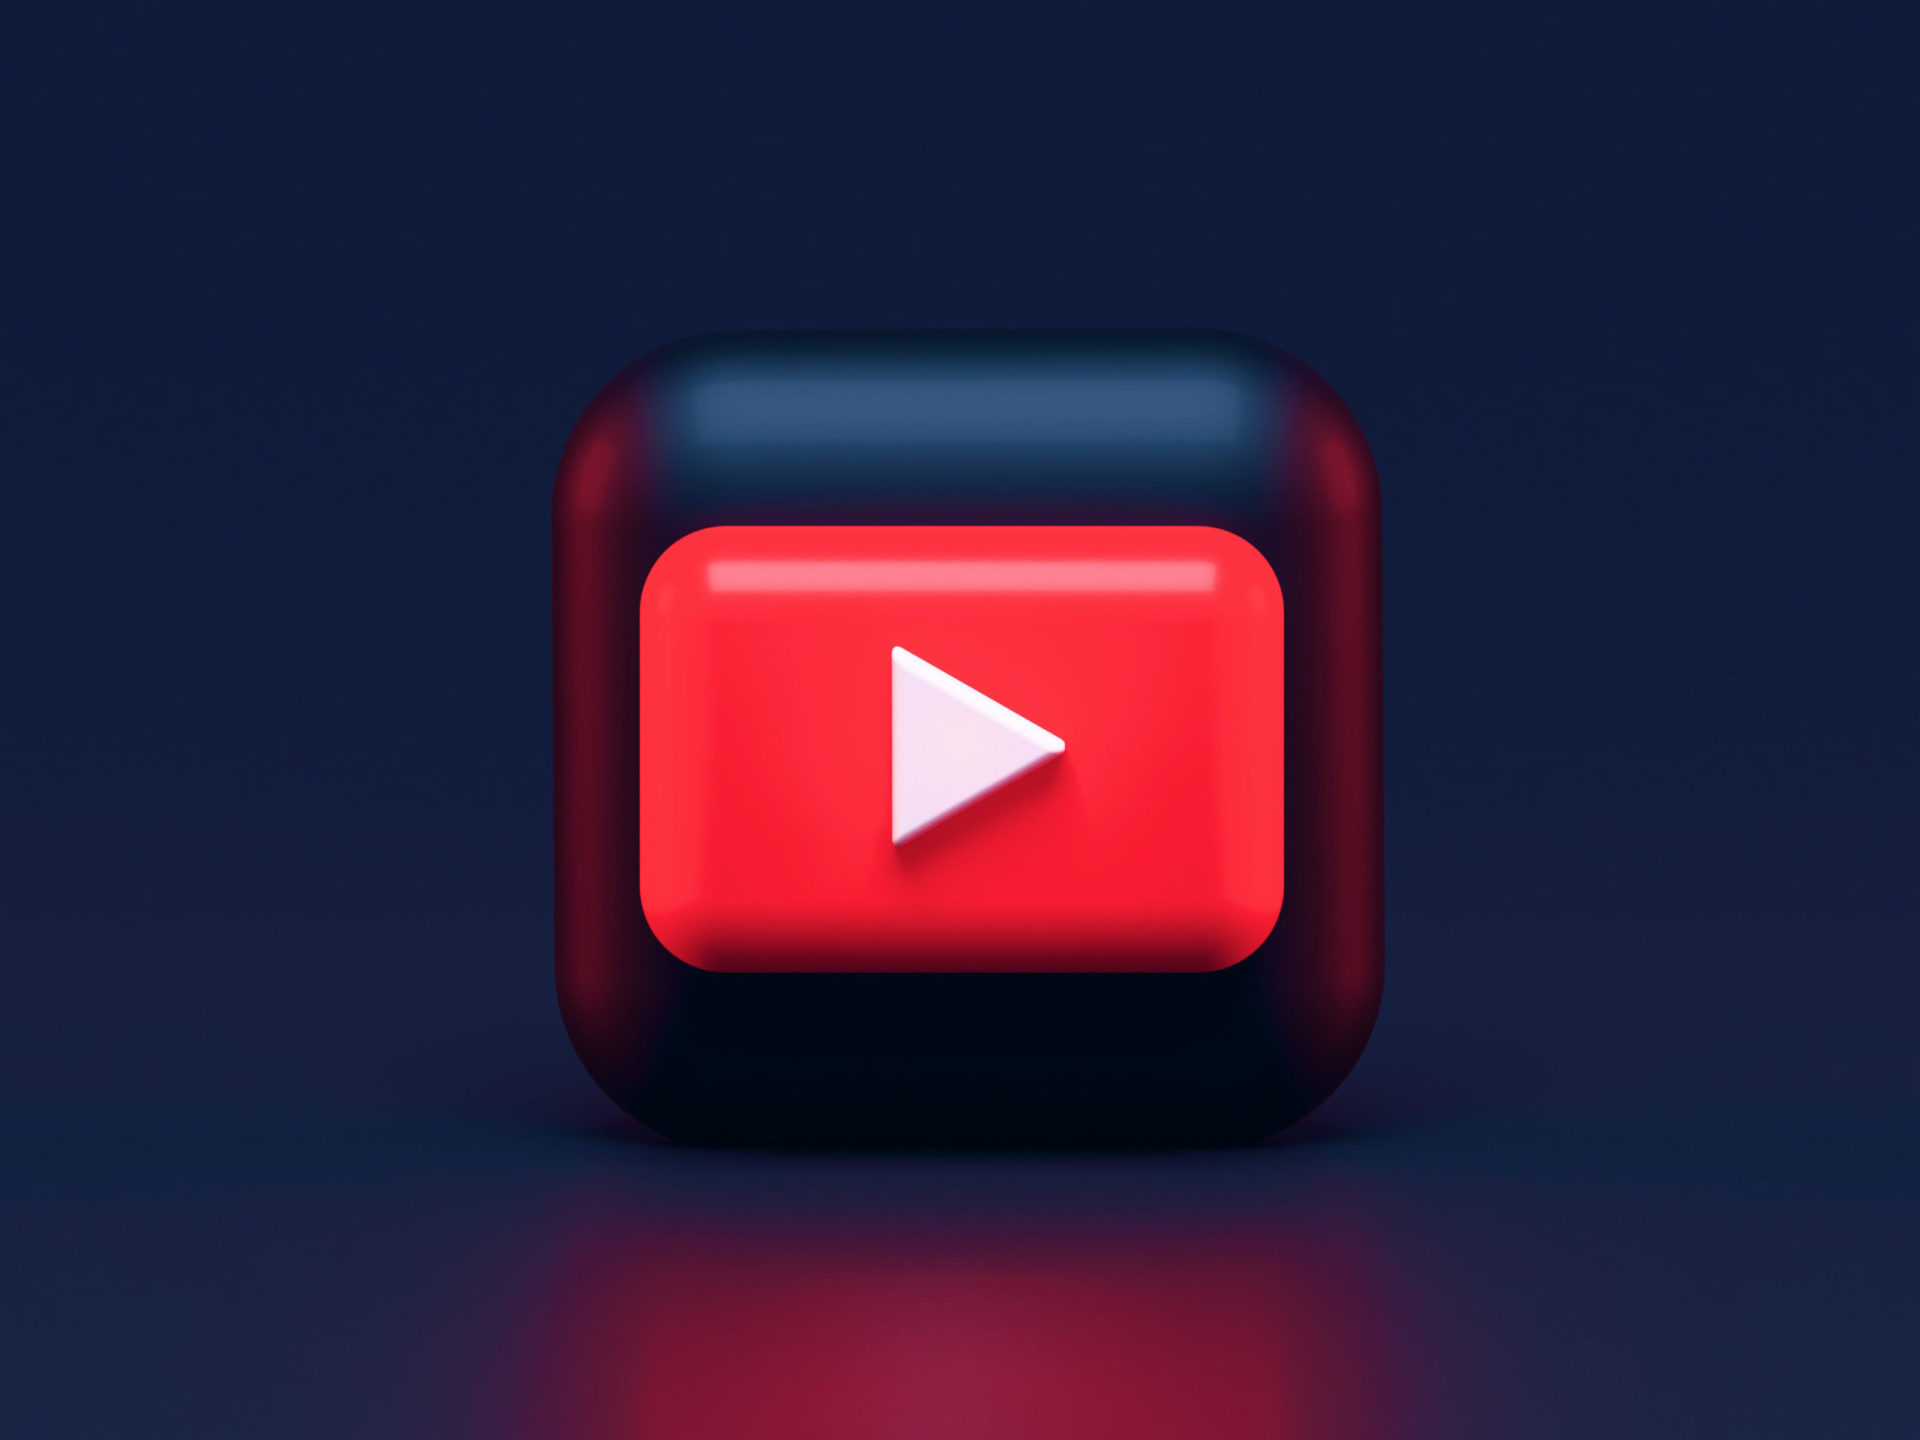 A 3D rendering of the youtube logo, in an ominous dark background with a red reflection in the foreground